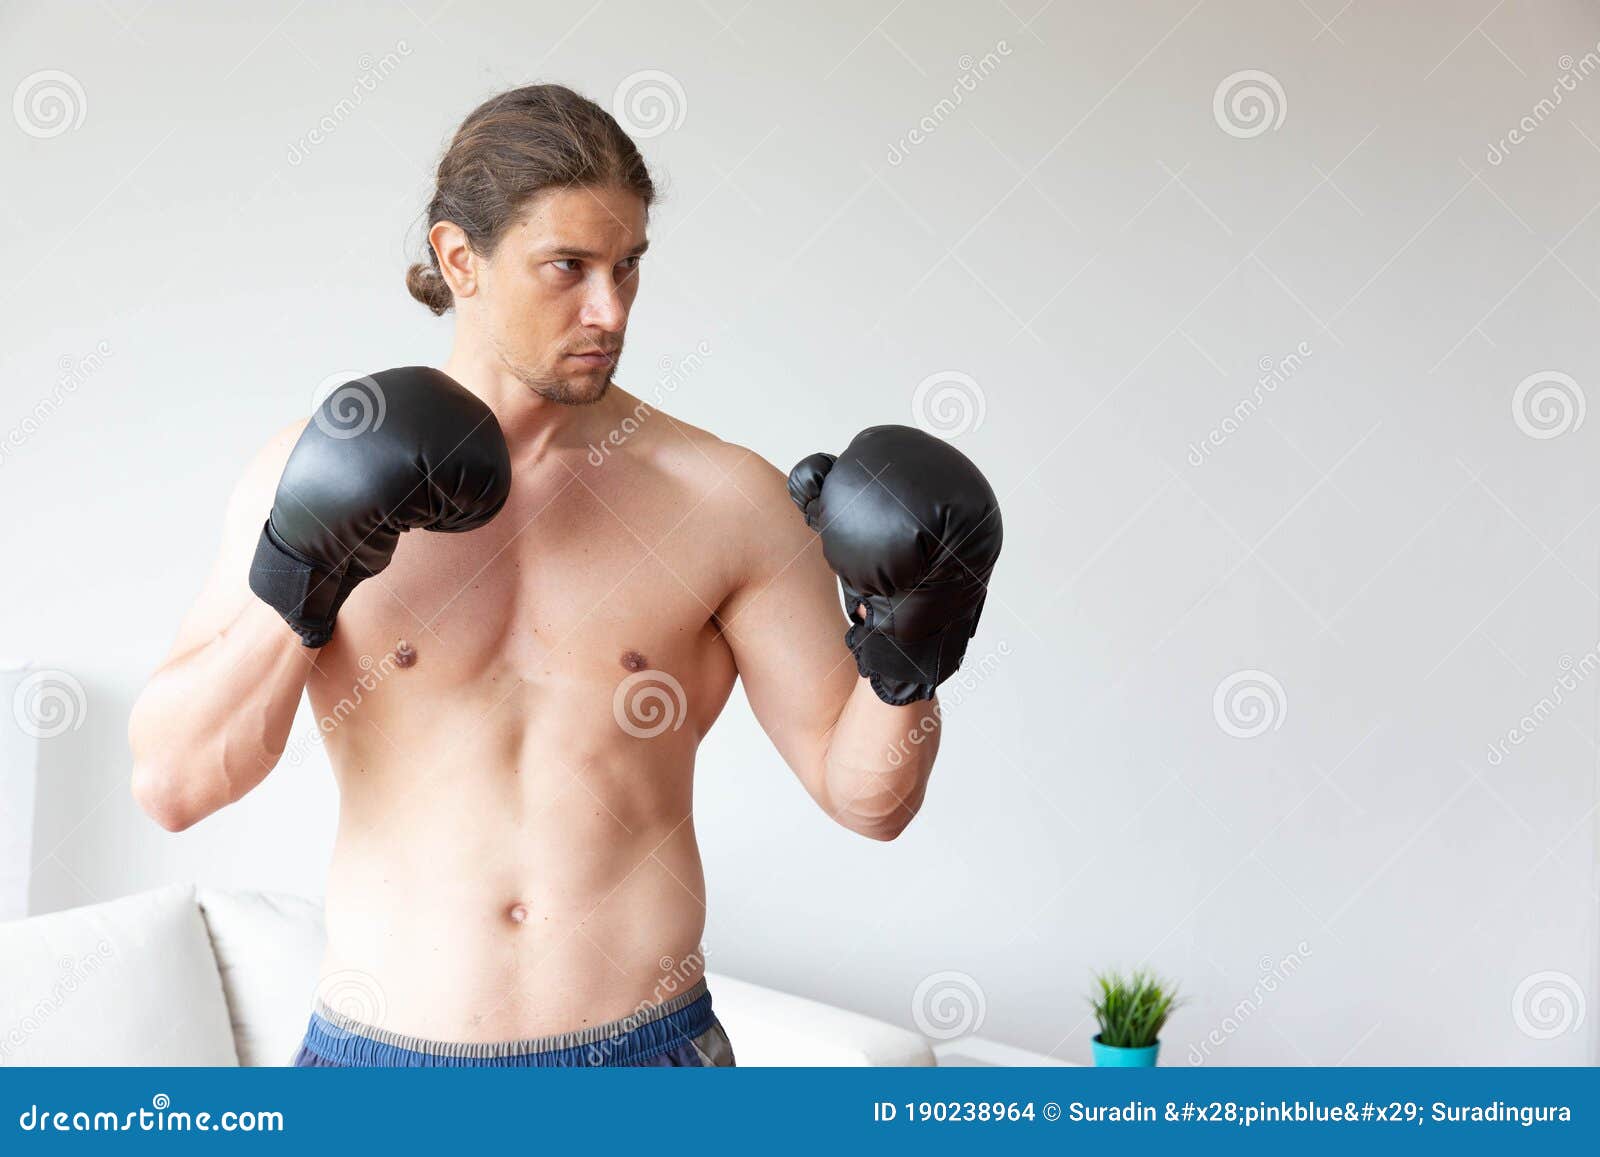 A Sport Man Has Boxing Training in His Living Room at Home Stock Photo